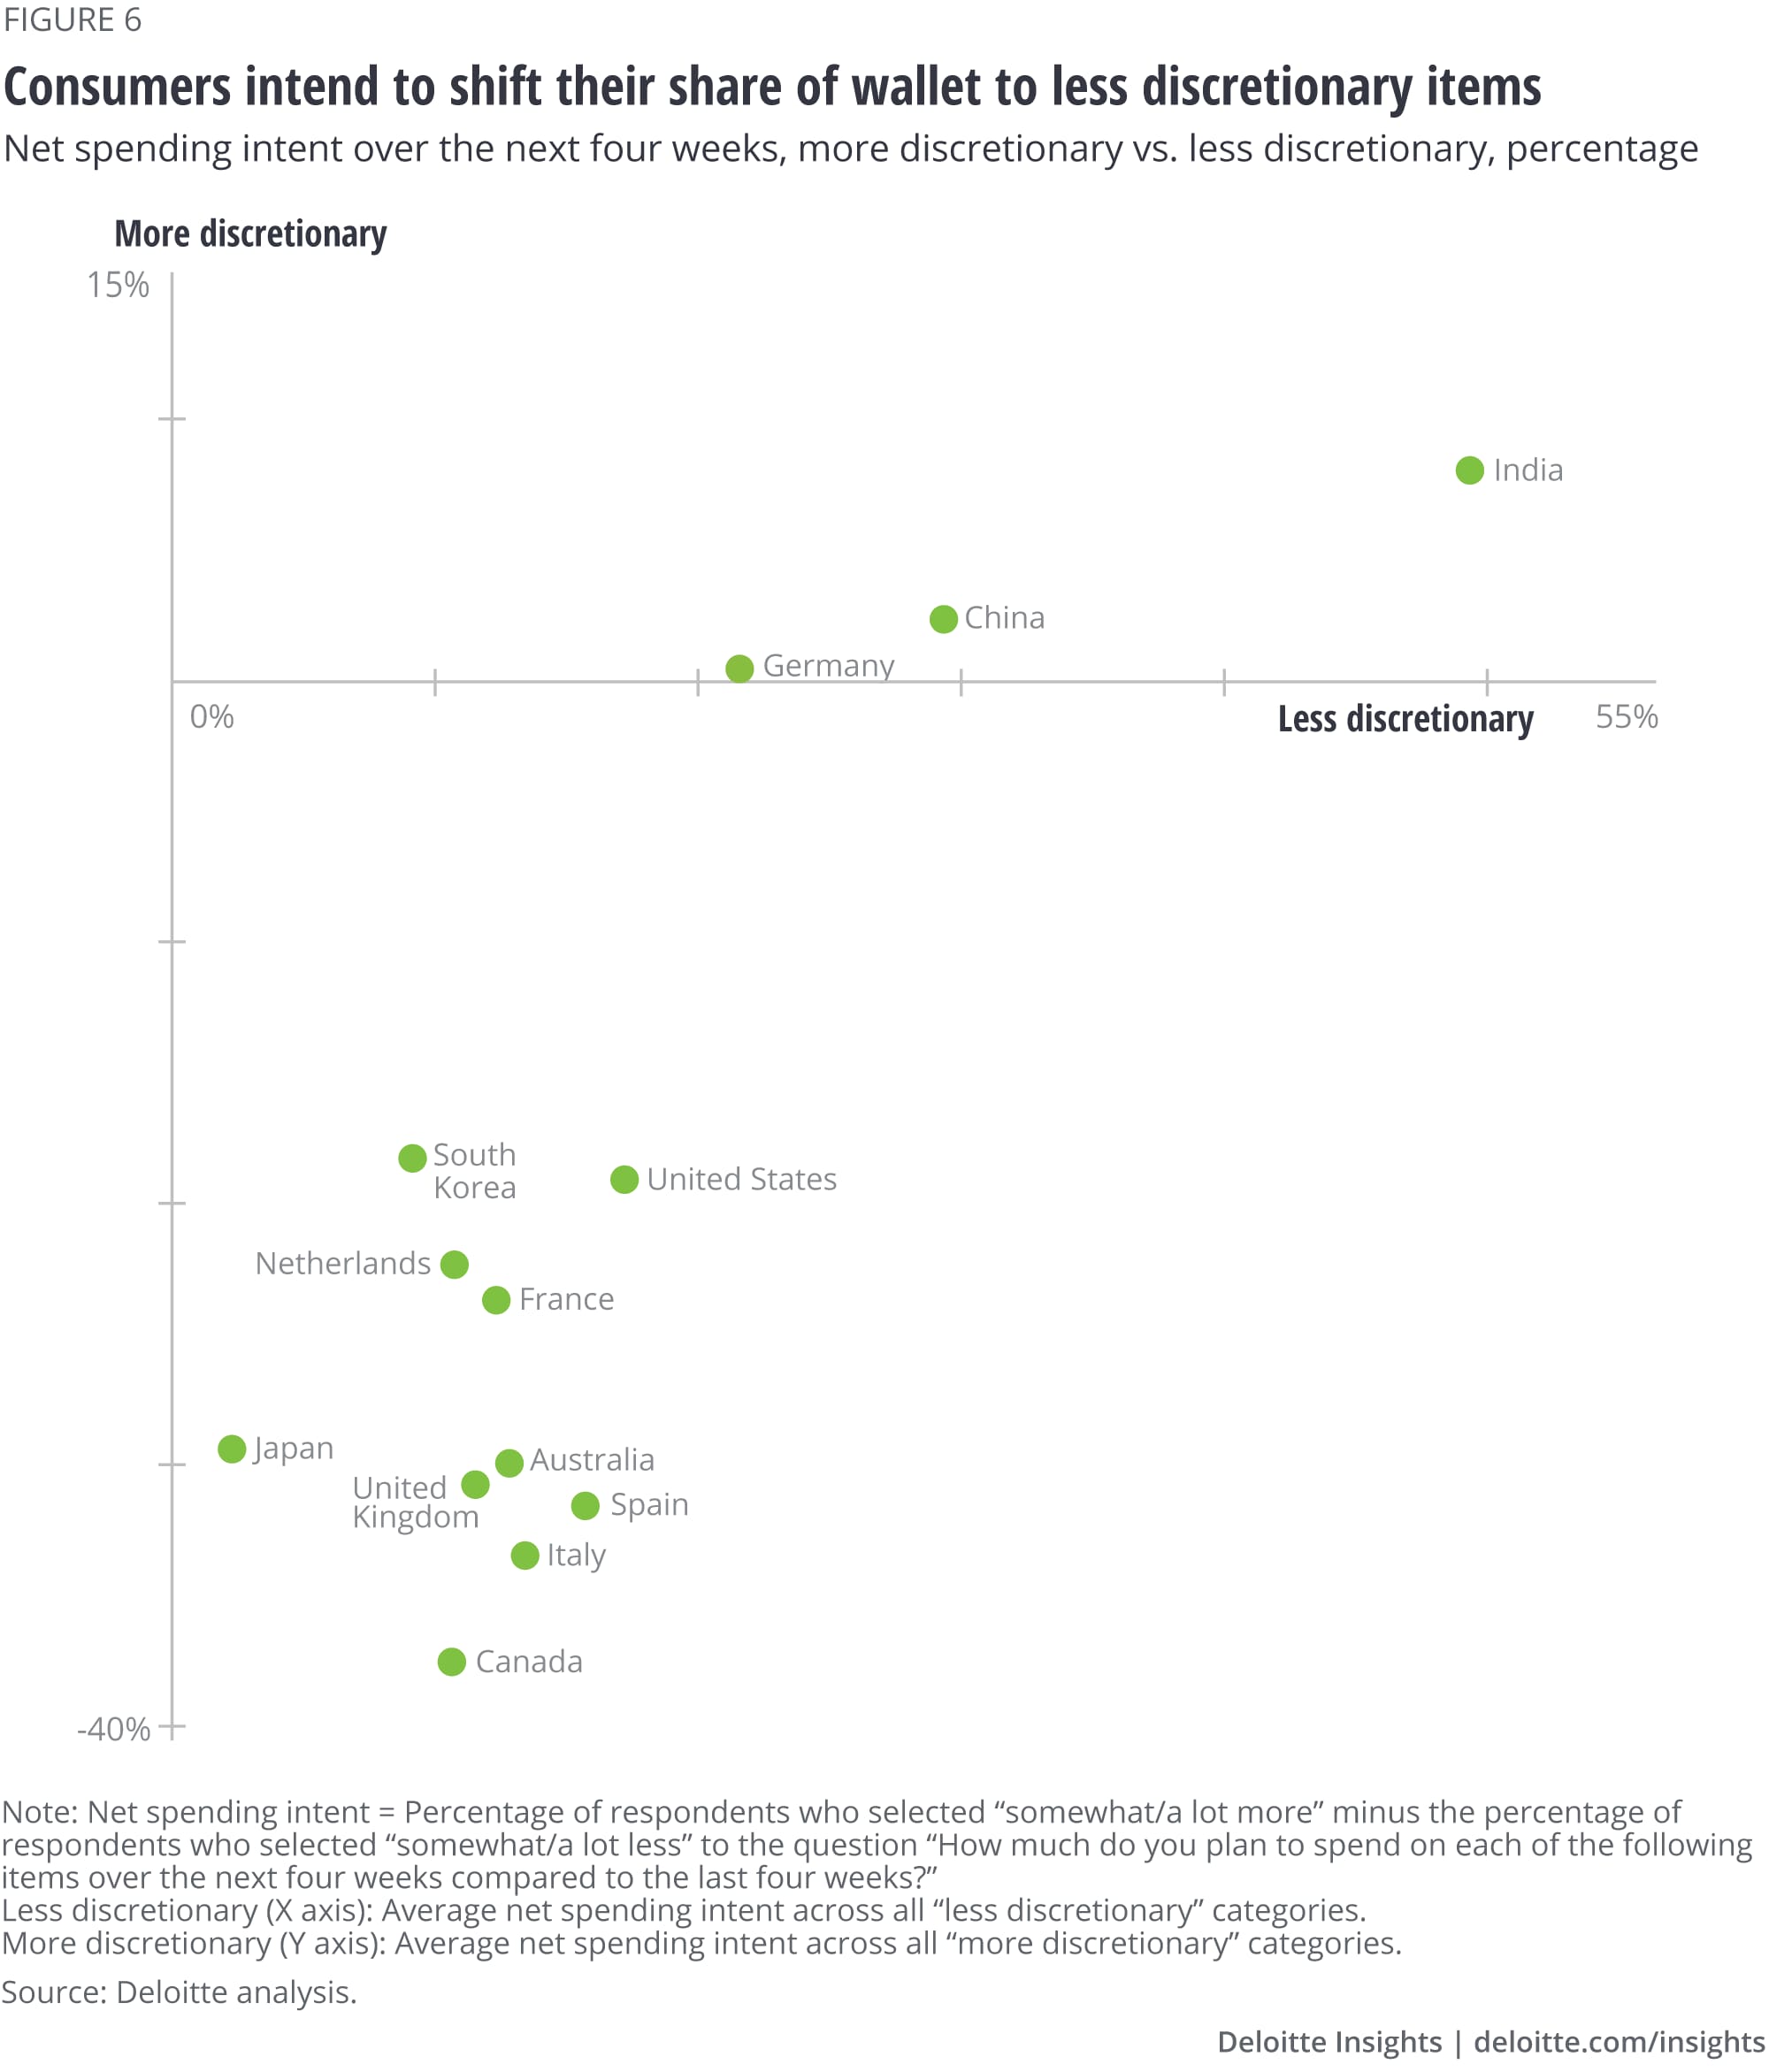 Consumers intend to shift their share of the wallet to less discretionary items